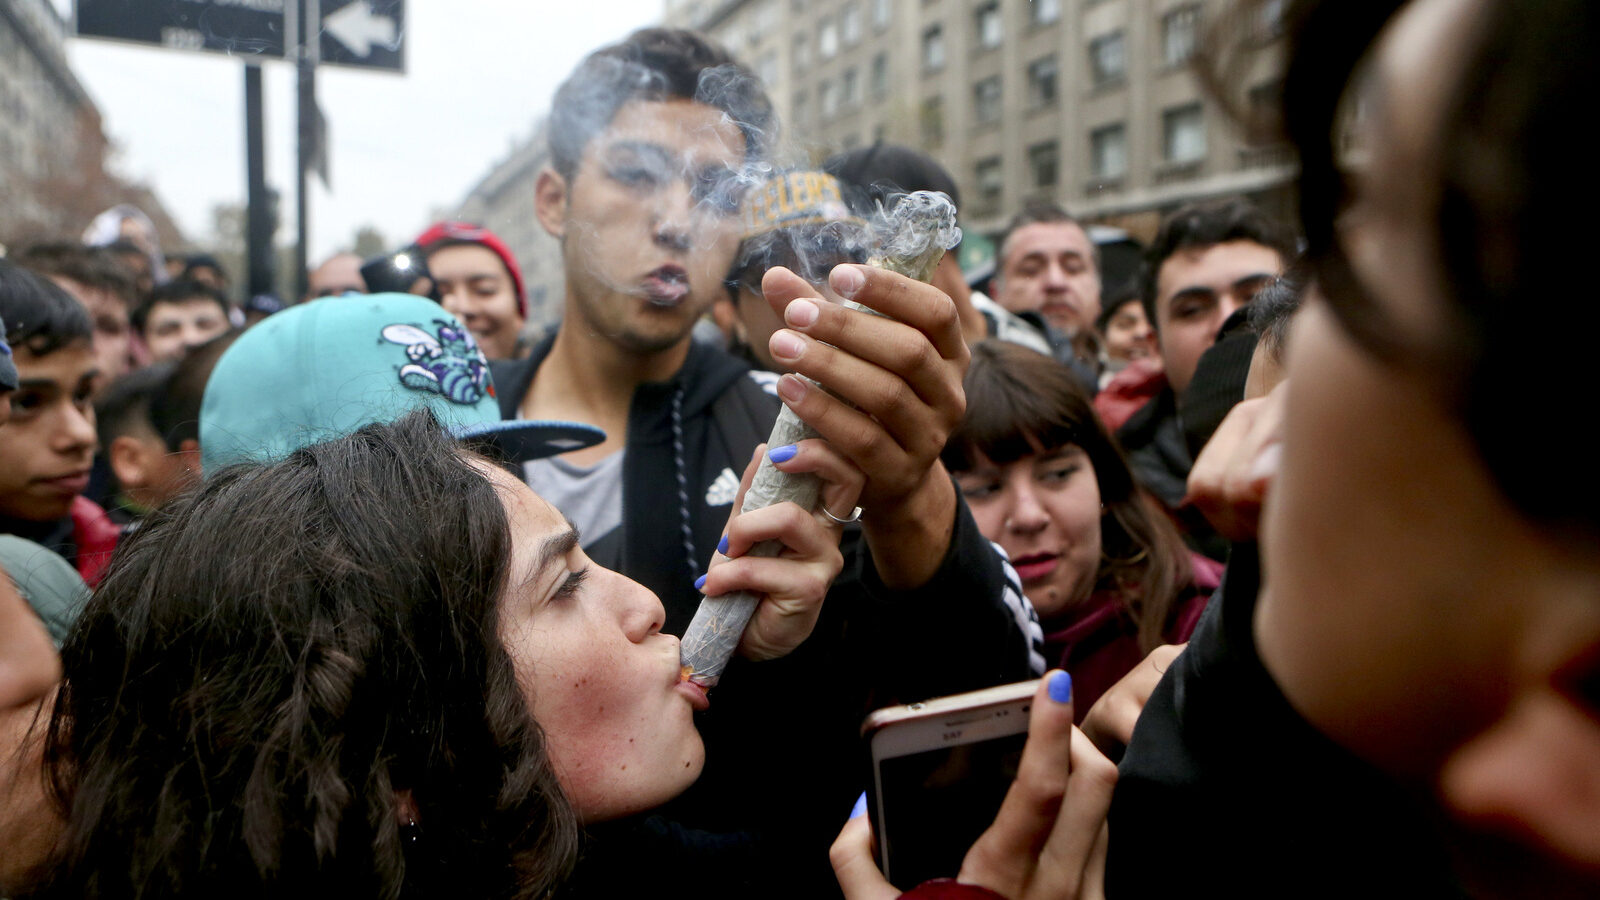 A youth smokes a joint during a demonstration in favor of the legalization of marijuana near La Moneda presidential palace in Santiago, Chile, Thursday, April 20, 2017. In Chile, it's only legal to buy and sell marijuana seeds for collection, and to use the herb for medicinal purposes when approved by the government. (AP/Esteban Felix)